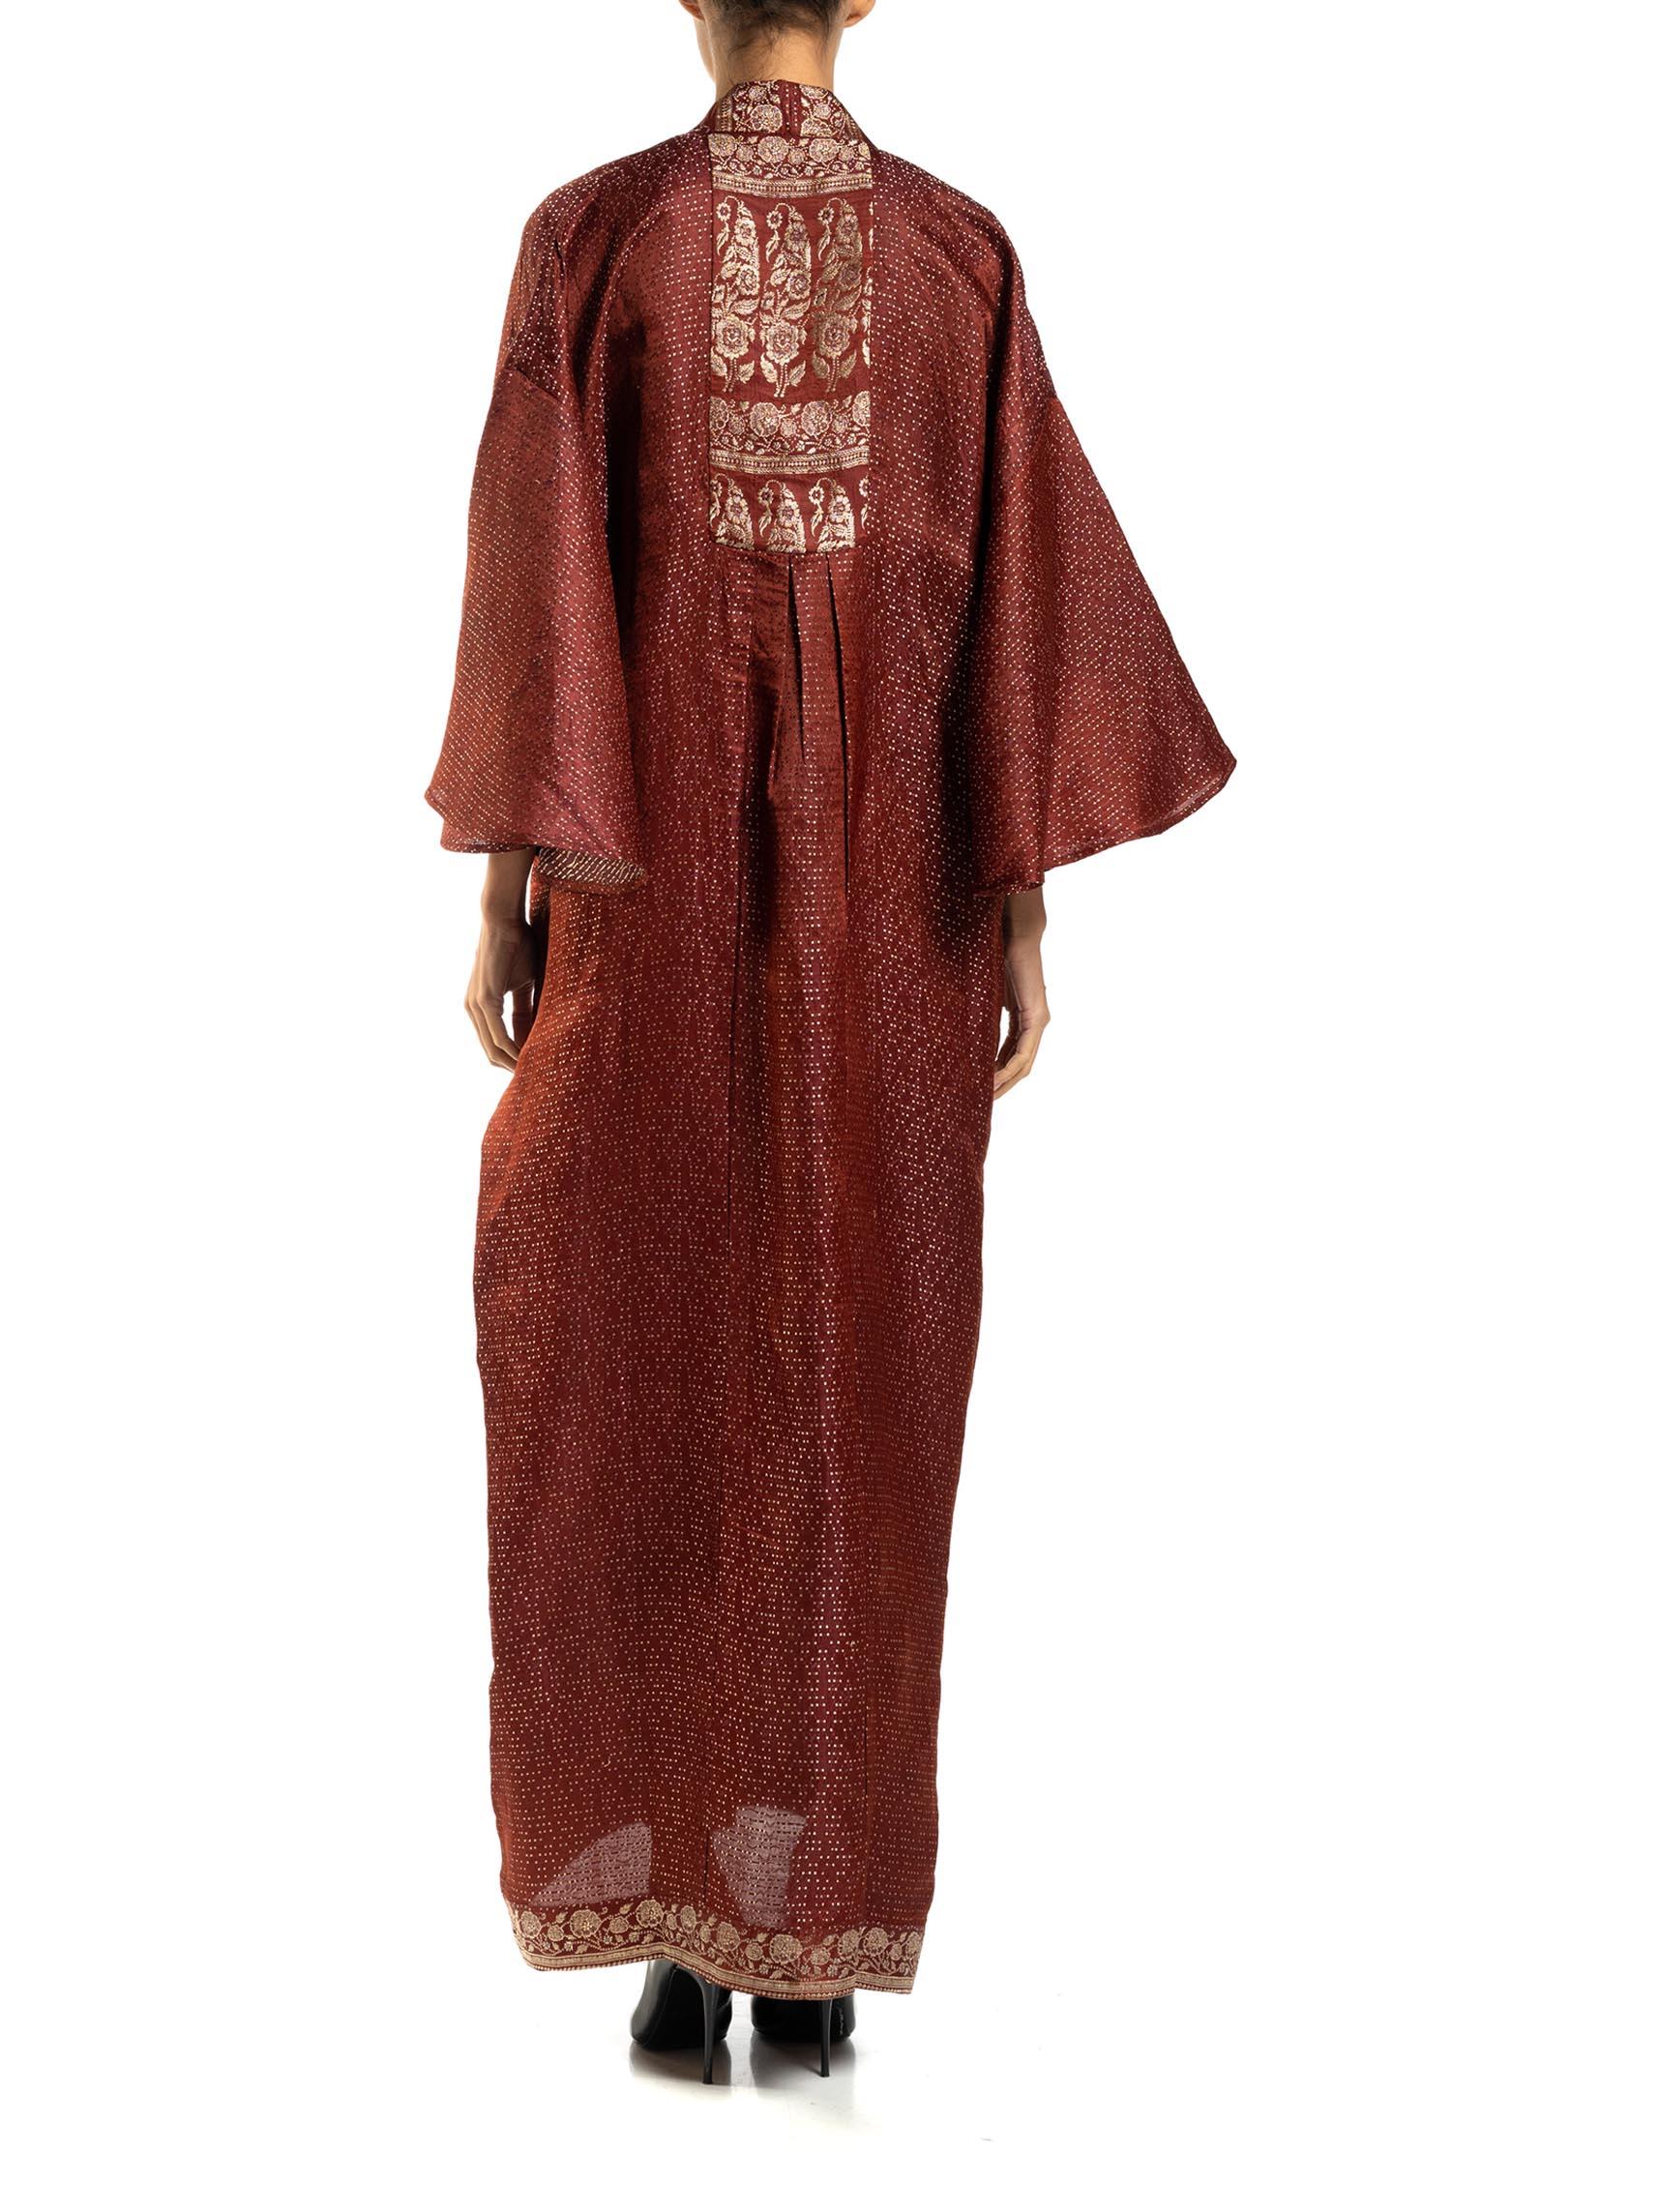 MORPHEW COLLECTION Burgundy Floral Silk Checkered Kaftan Made From Vintage Sari For Sale 3